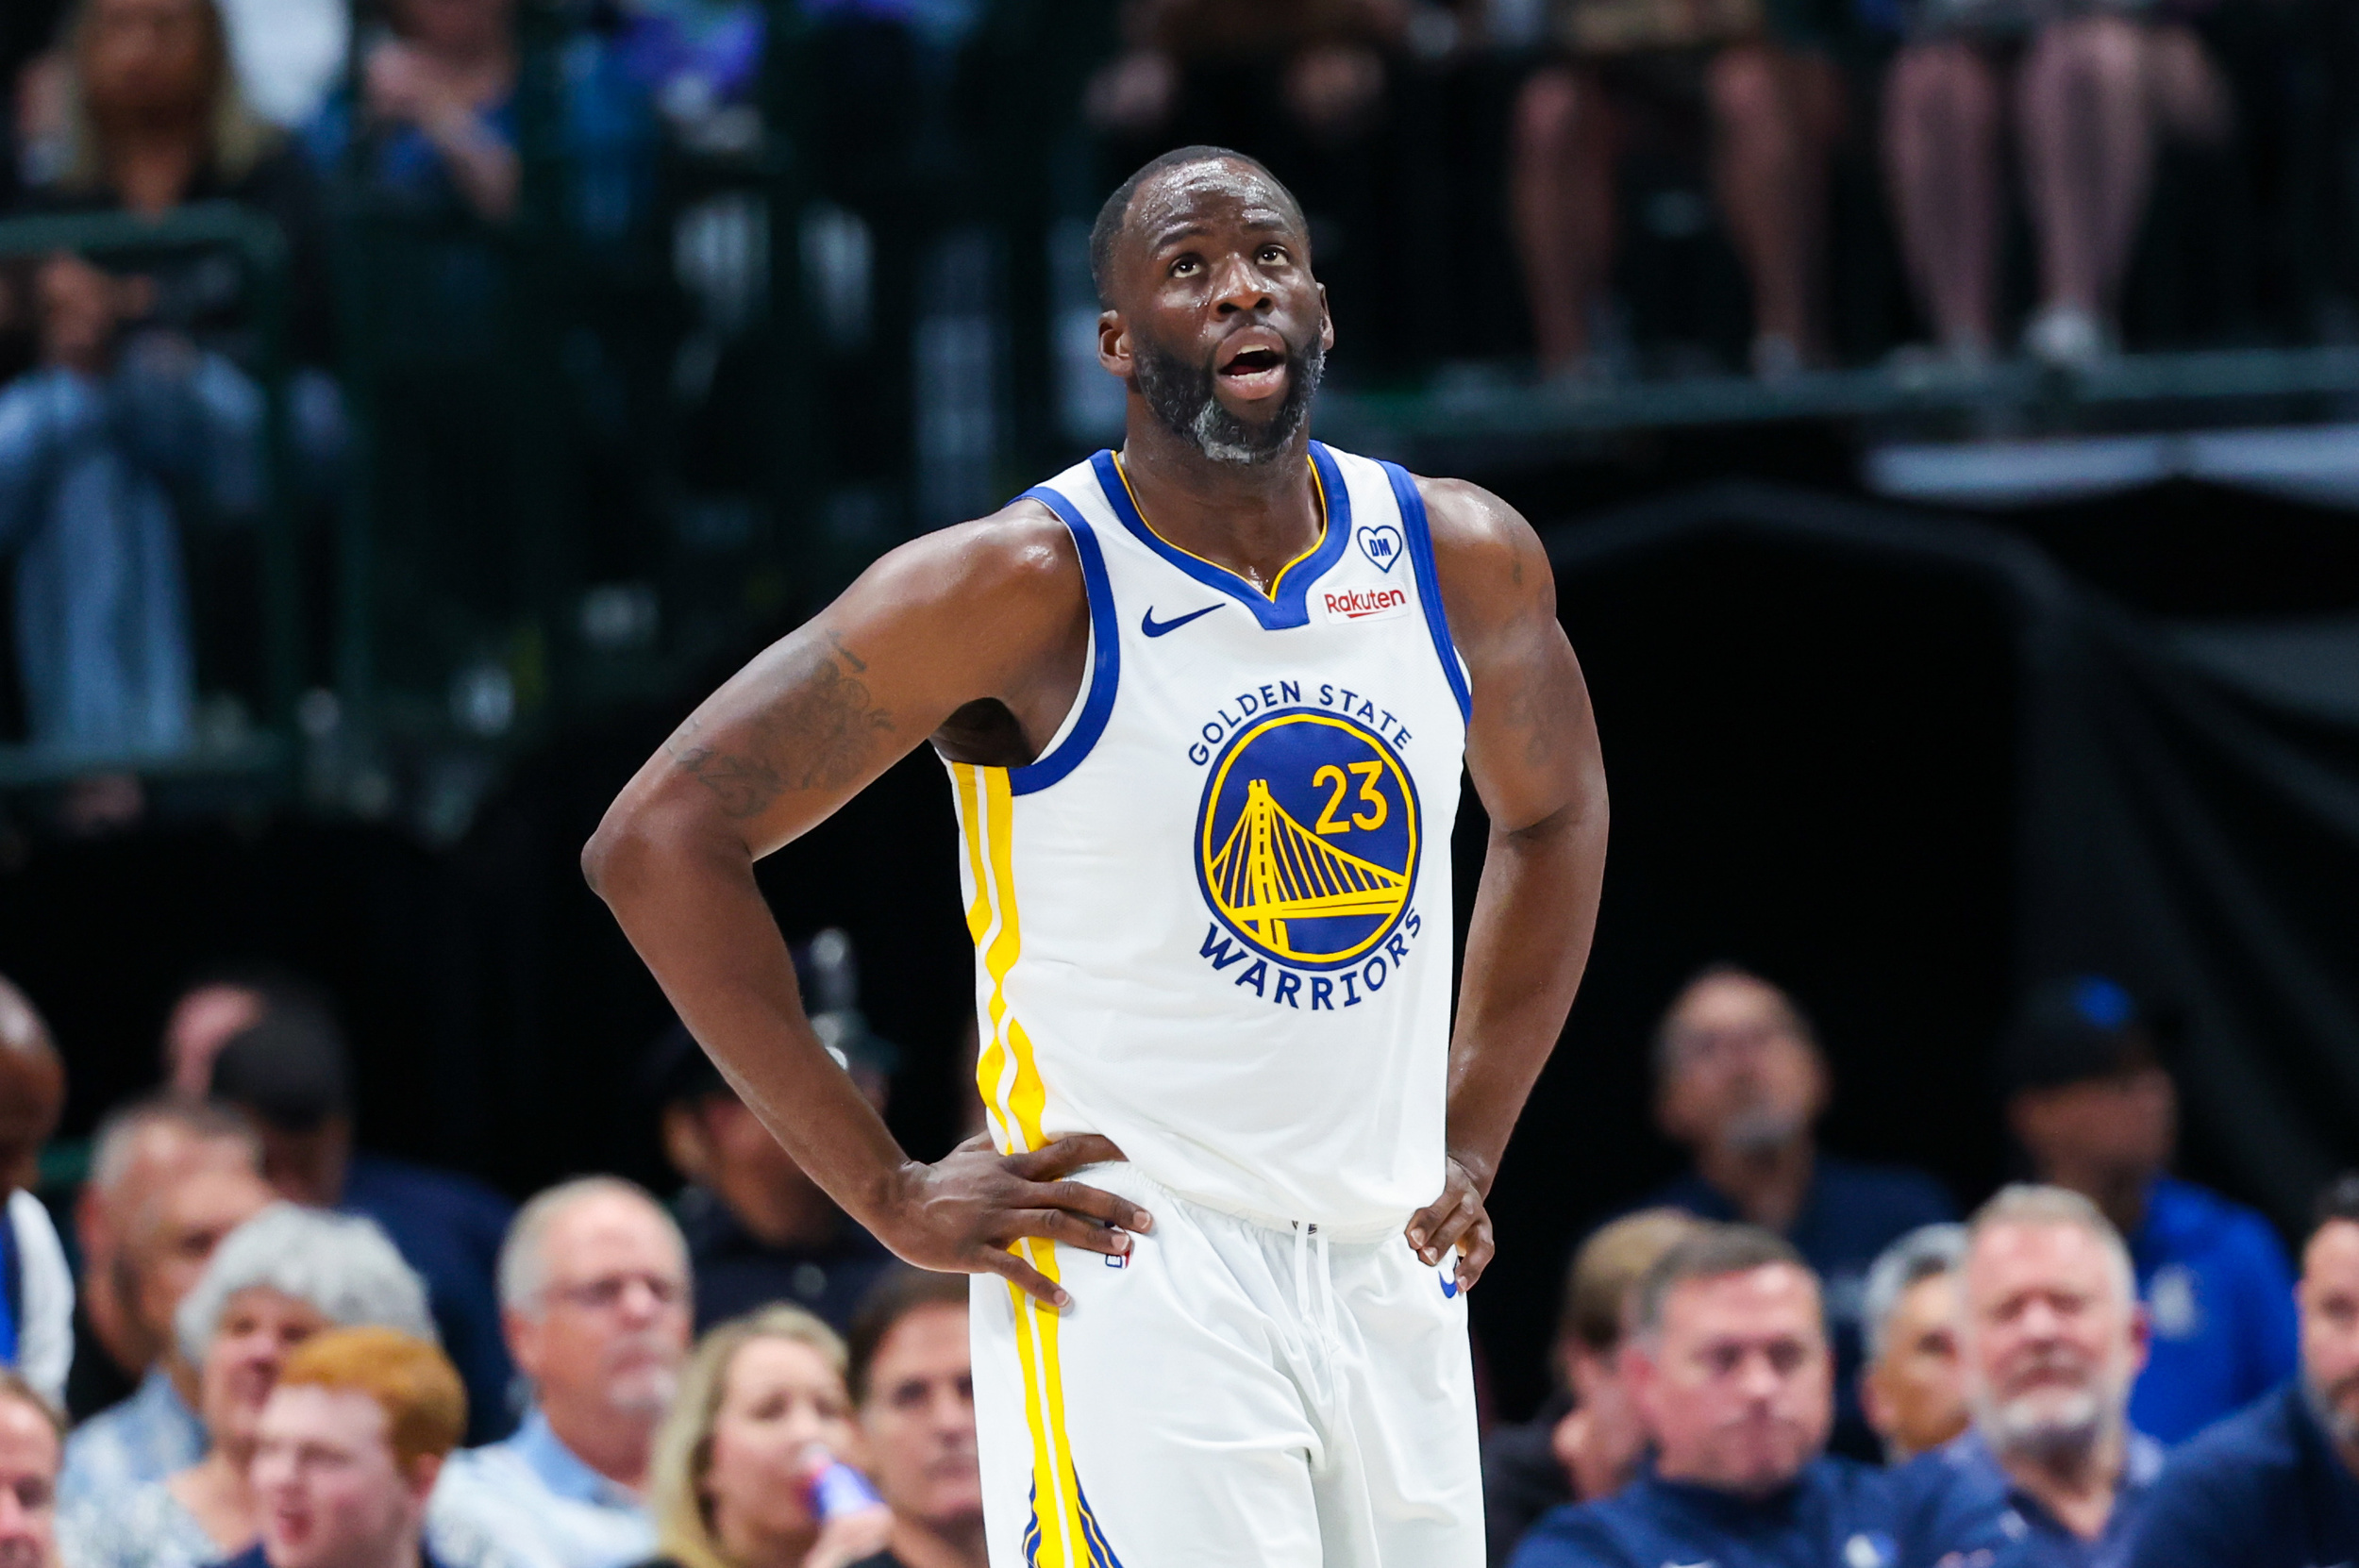 draymond green doubles down on knicks' inability to win a championship